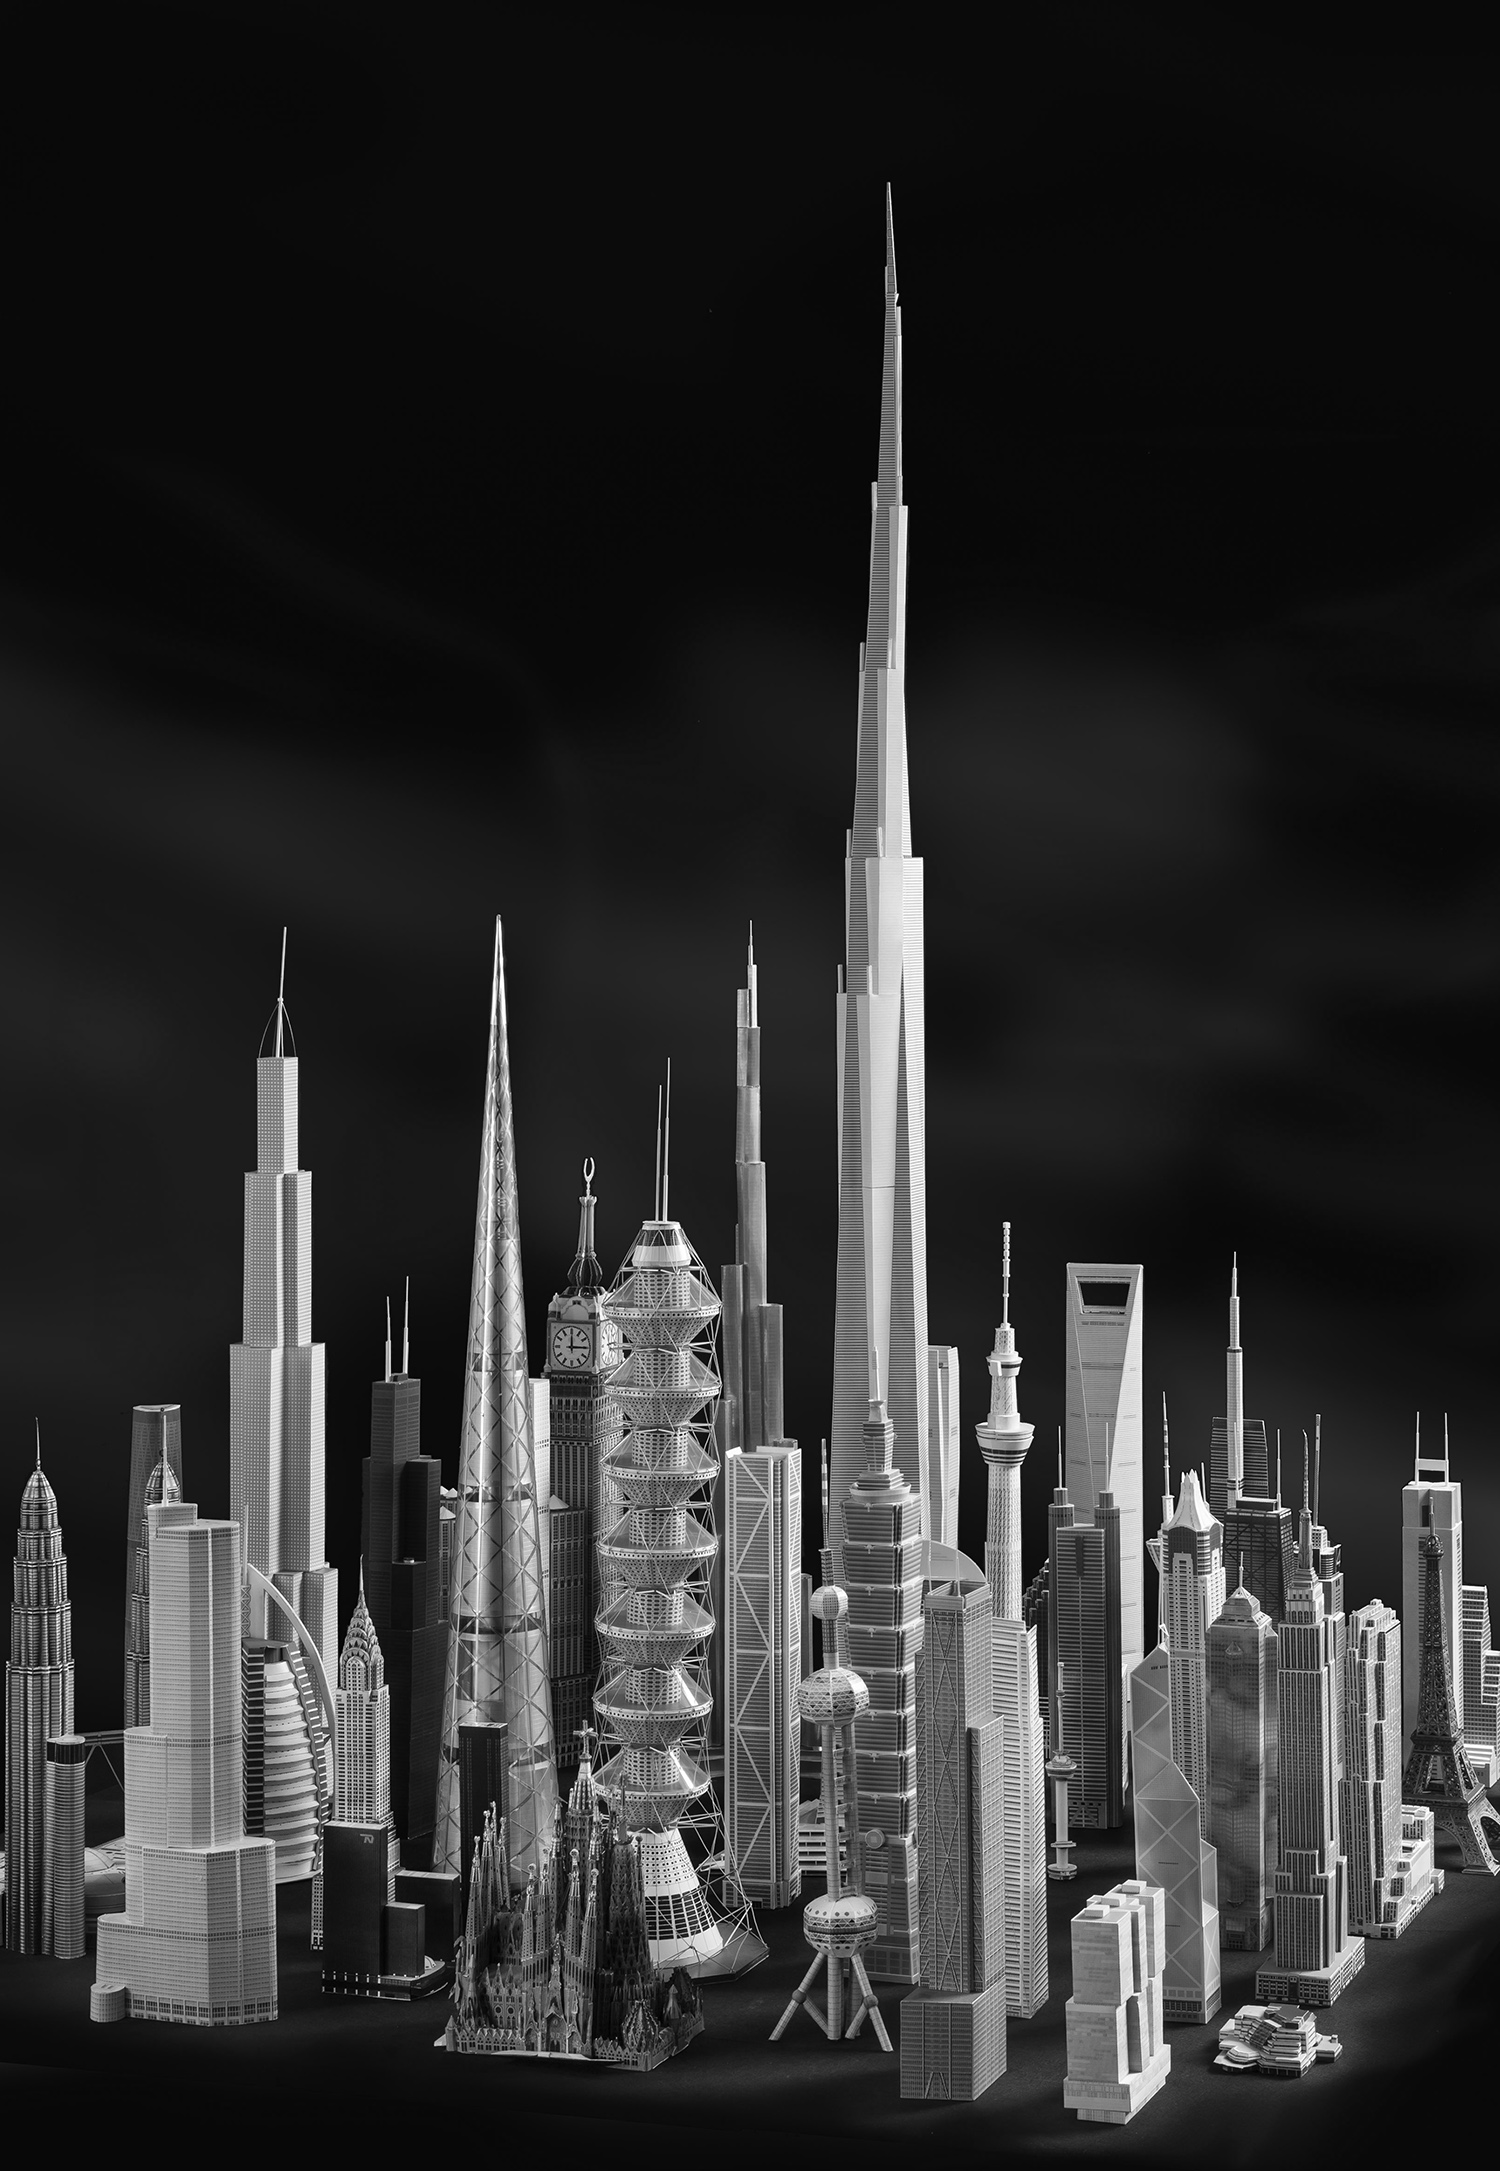 Vertical Cities Exhibition at Yale School of Architecture - Study